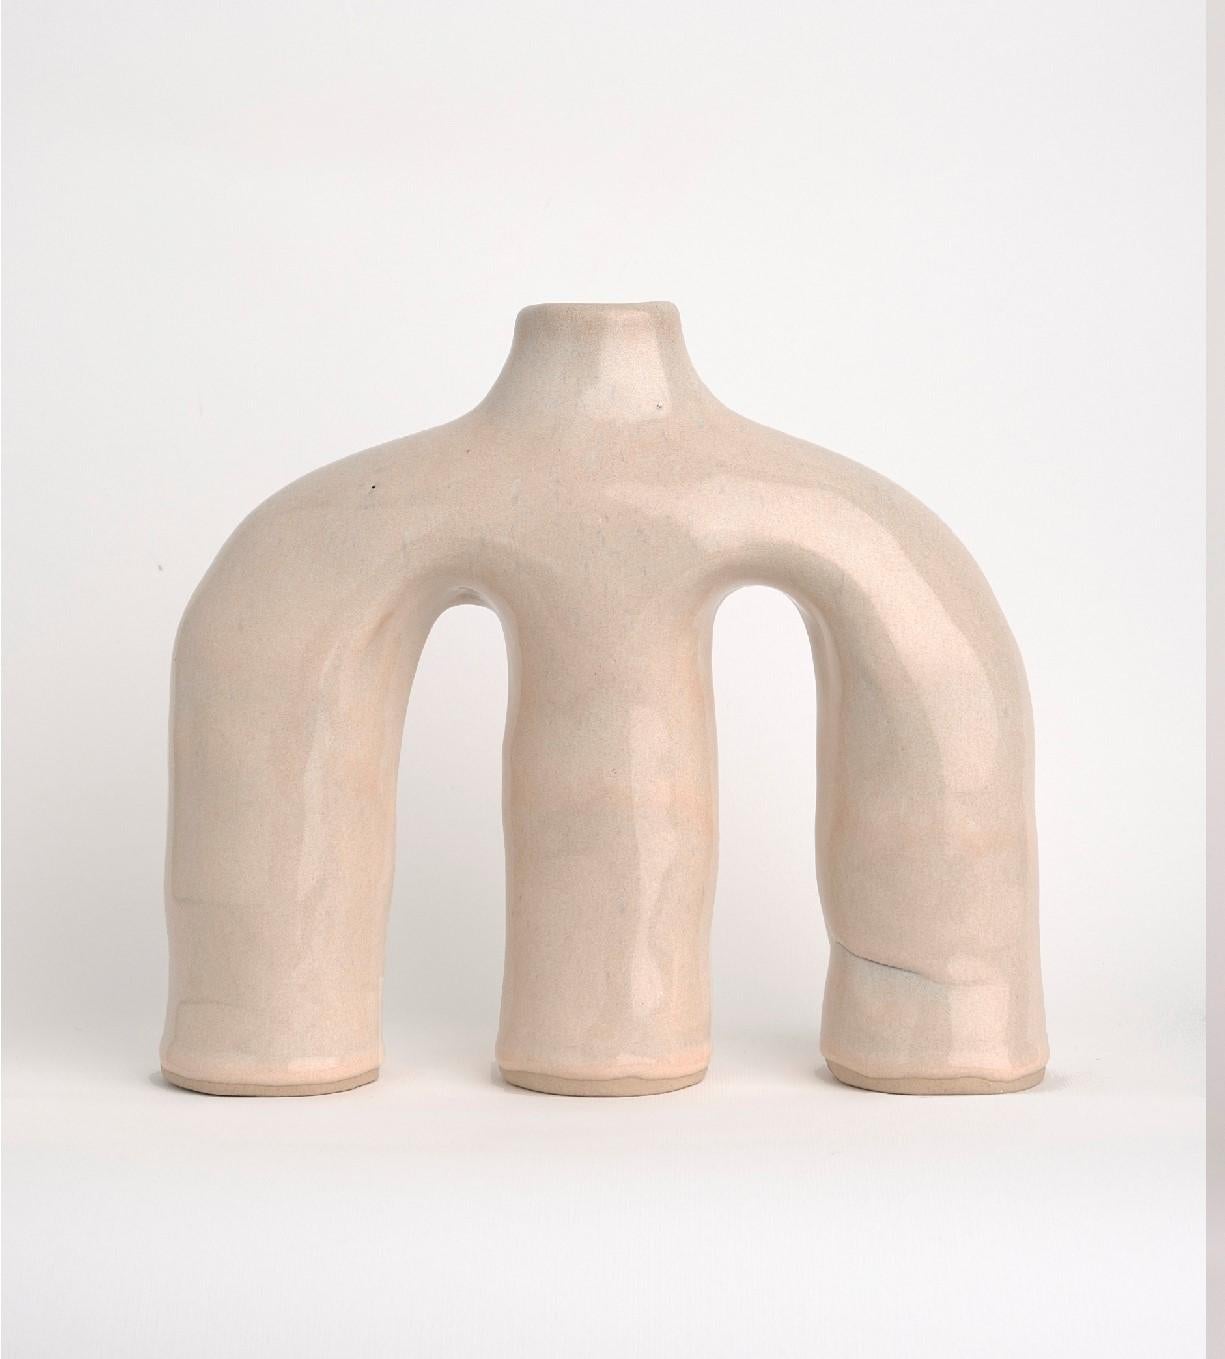 Pale Opal Anatomía Sutil Stoneware vase by Camila Apaez
One of a kind
Materials: Stoneware
Dimensions: 25 x 8 x 22 cm
Options: White Bone, Butter milk, Charcoal Black

This year has been shaped by the topographies of our homes and the